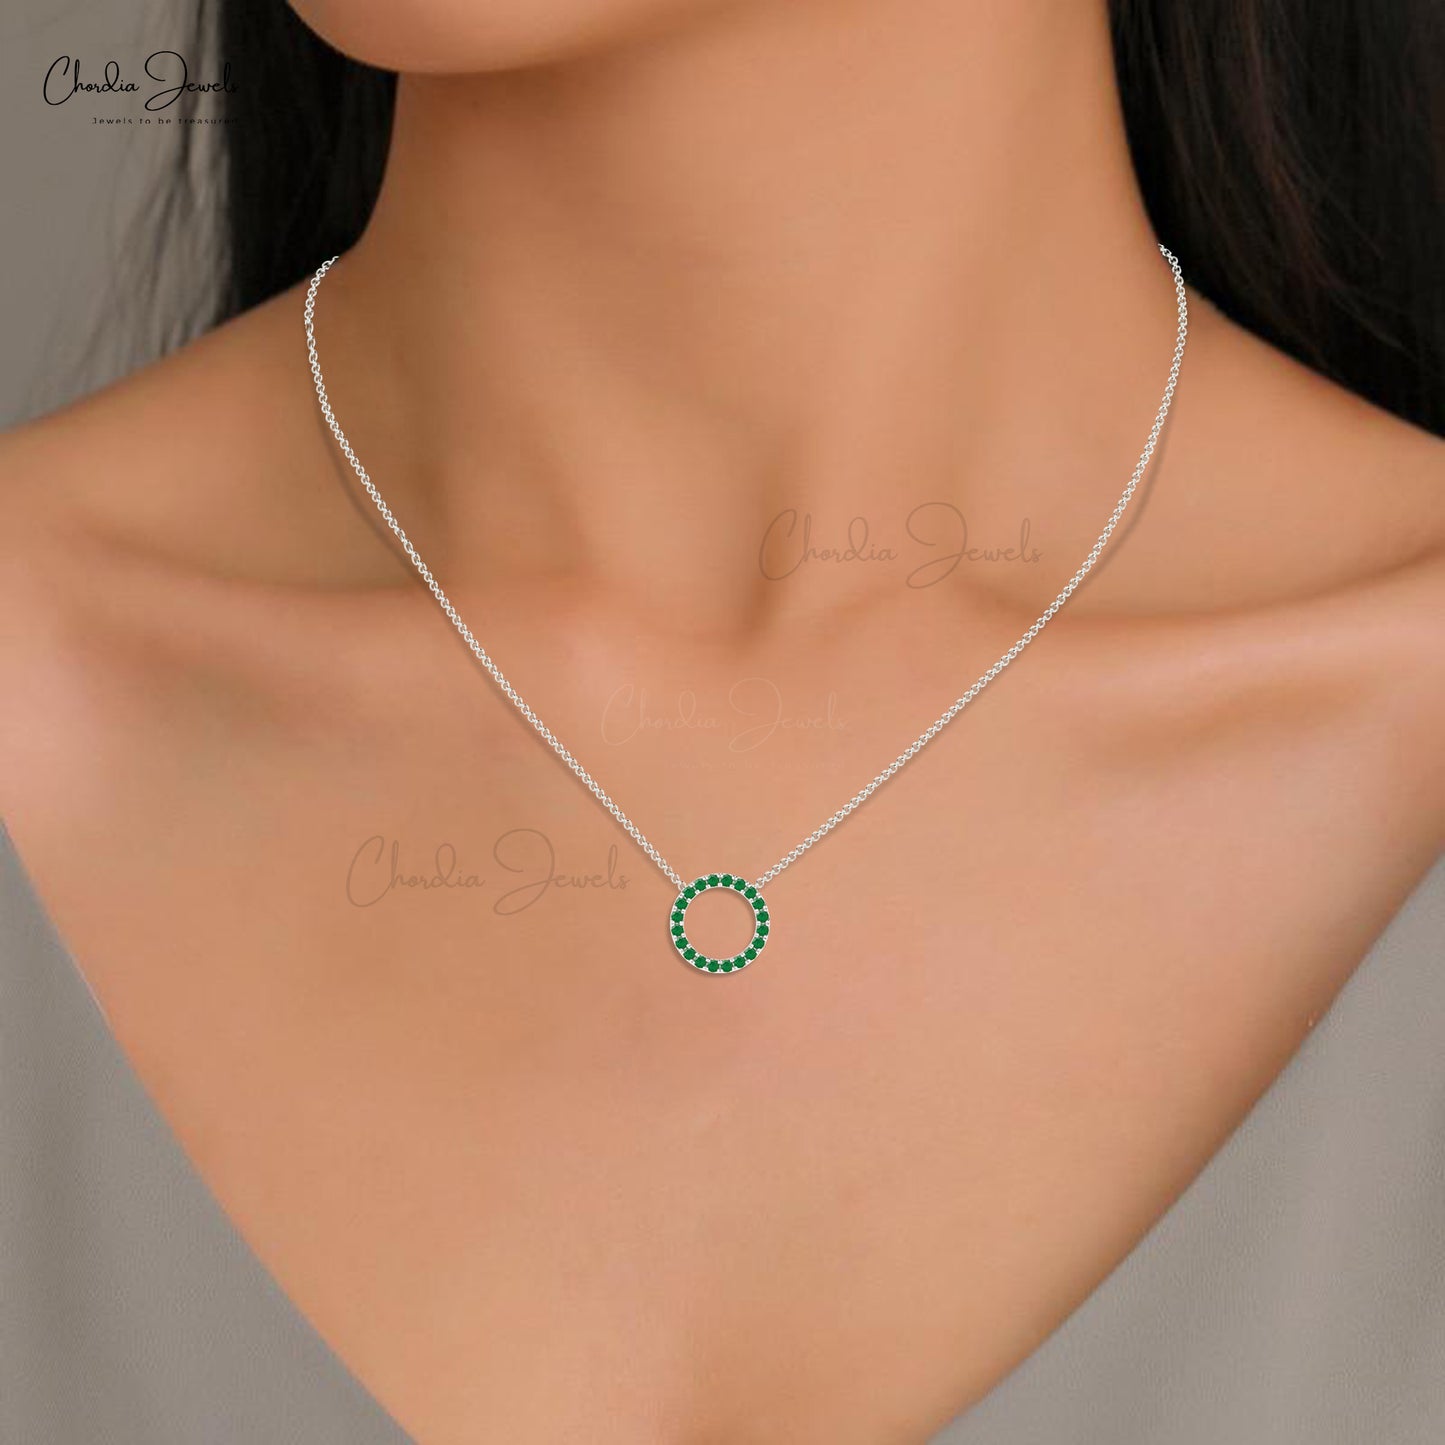 Authentic Green Emerald Circle Necklace Pendant With Spring Ring Closure Pure 14k Gold Jewelry Anniversary Gift For Wife